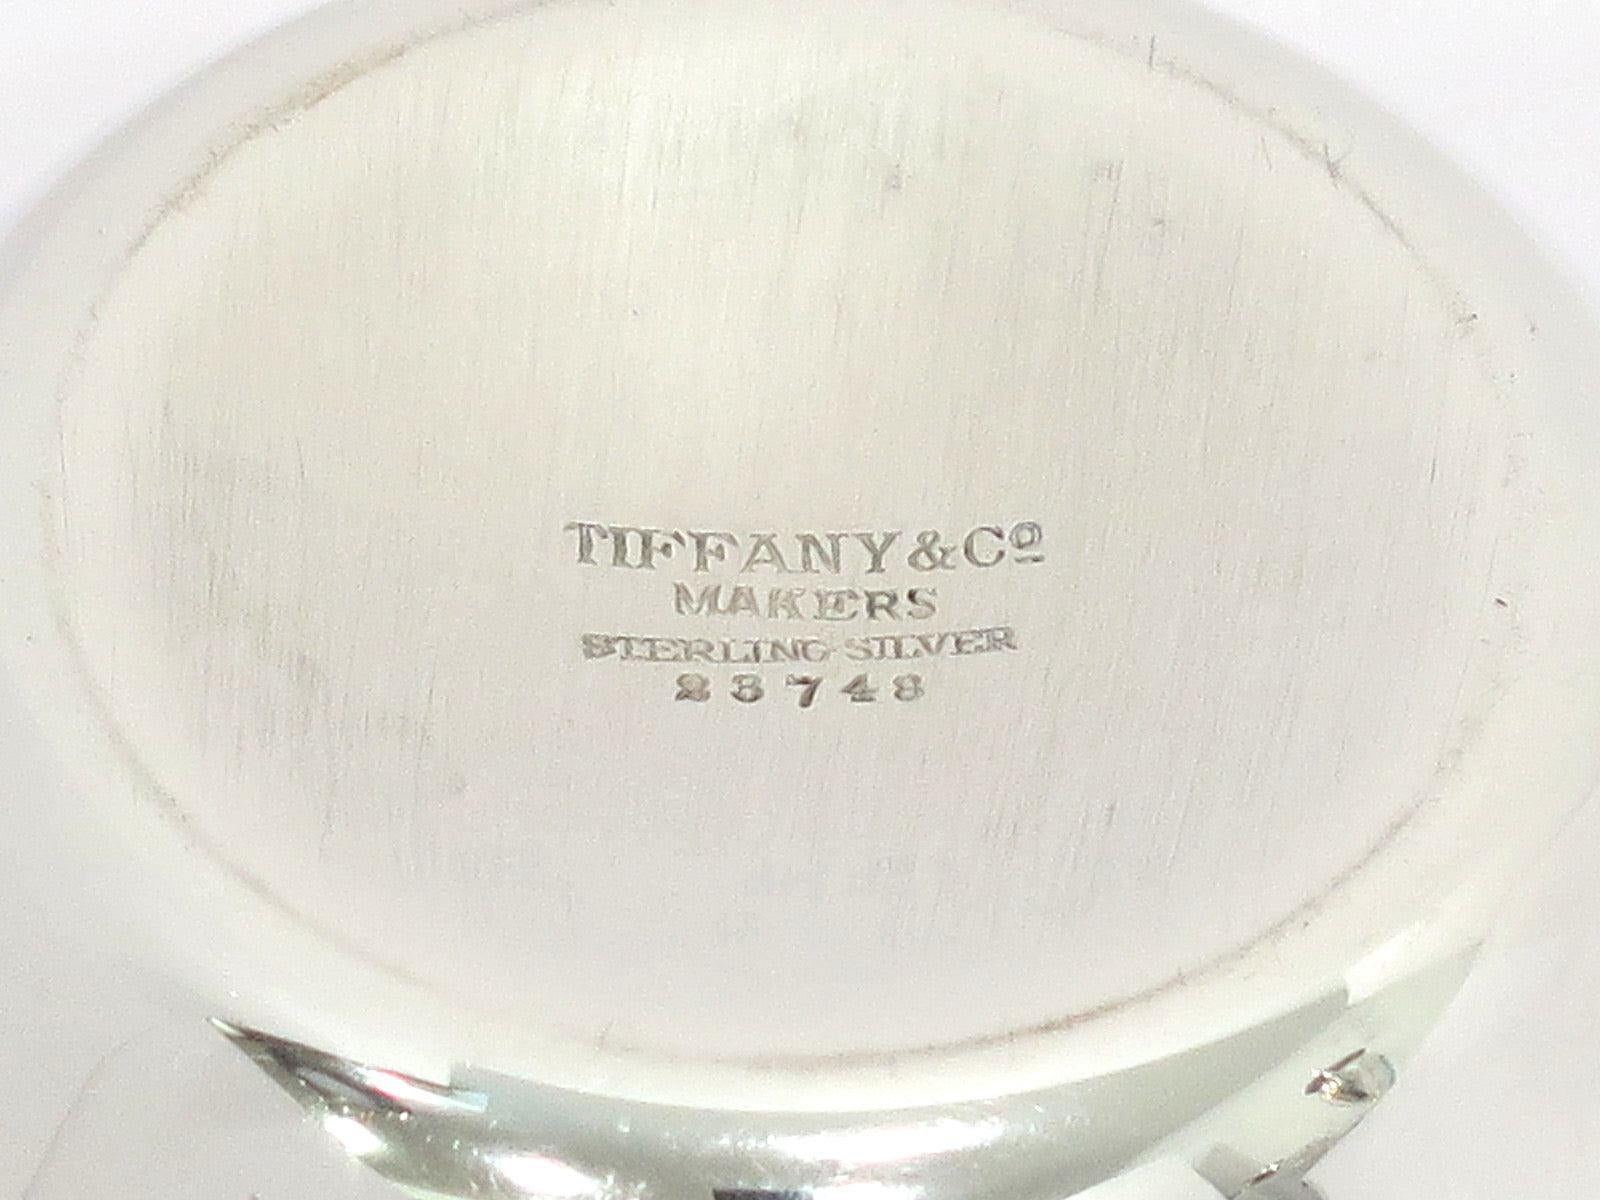 20th Century 4.5 in - Sterling Silver Tiffany & Co. Vintage Apple-Shaped Jar